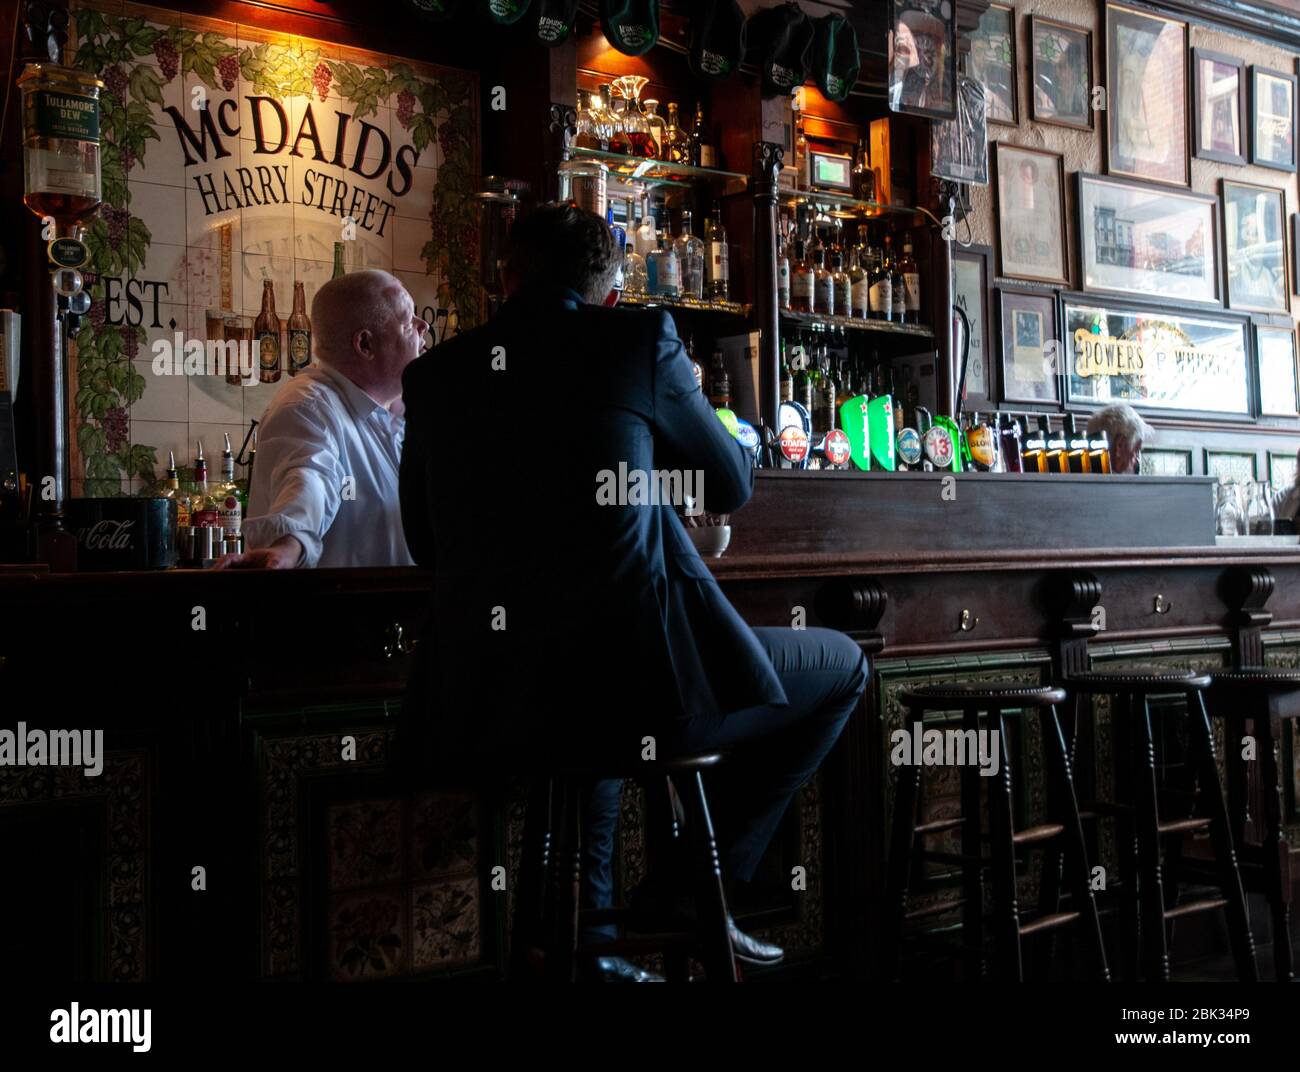 Publican and customer in conversation at the bar in McDaids pub in Harry Street in Dublin, Ireland. Stock Photo